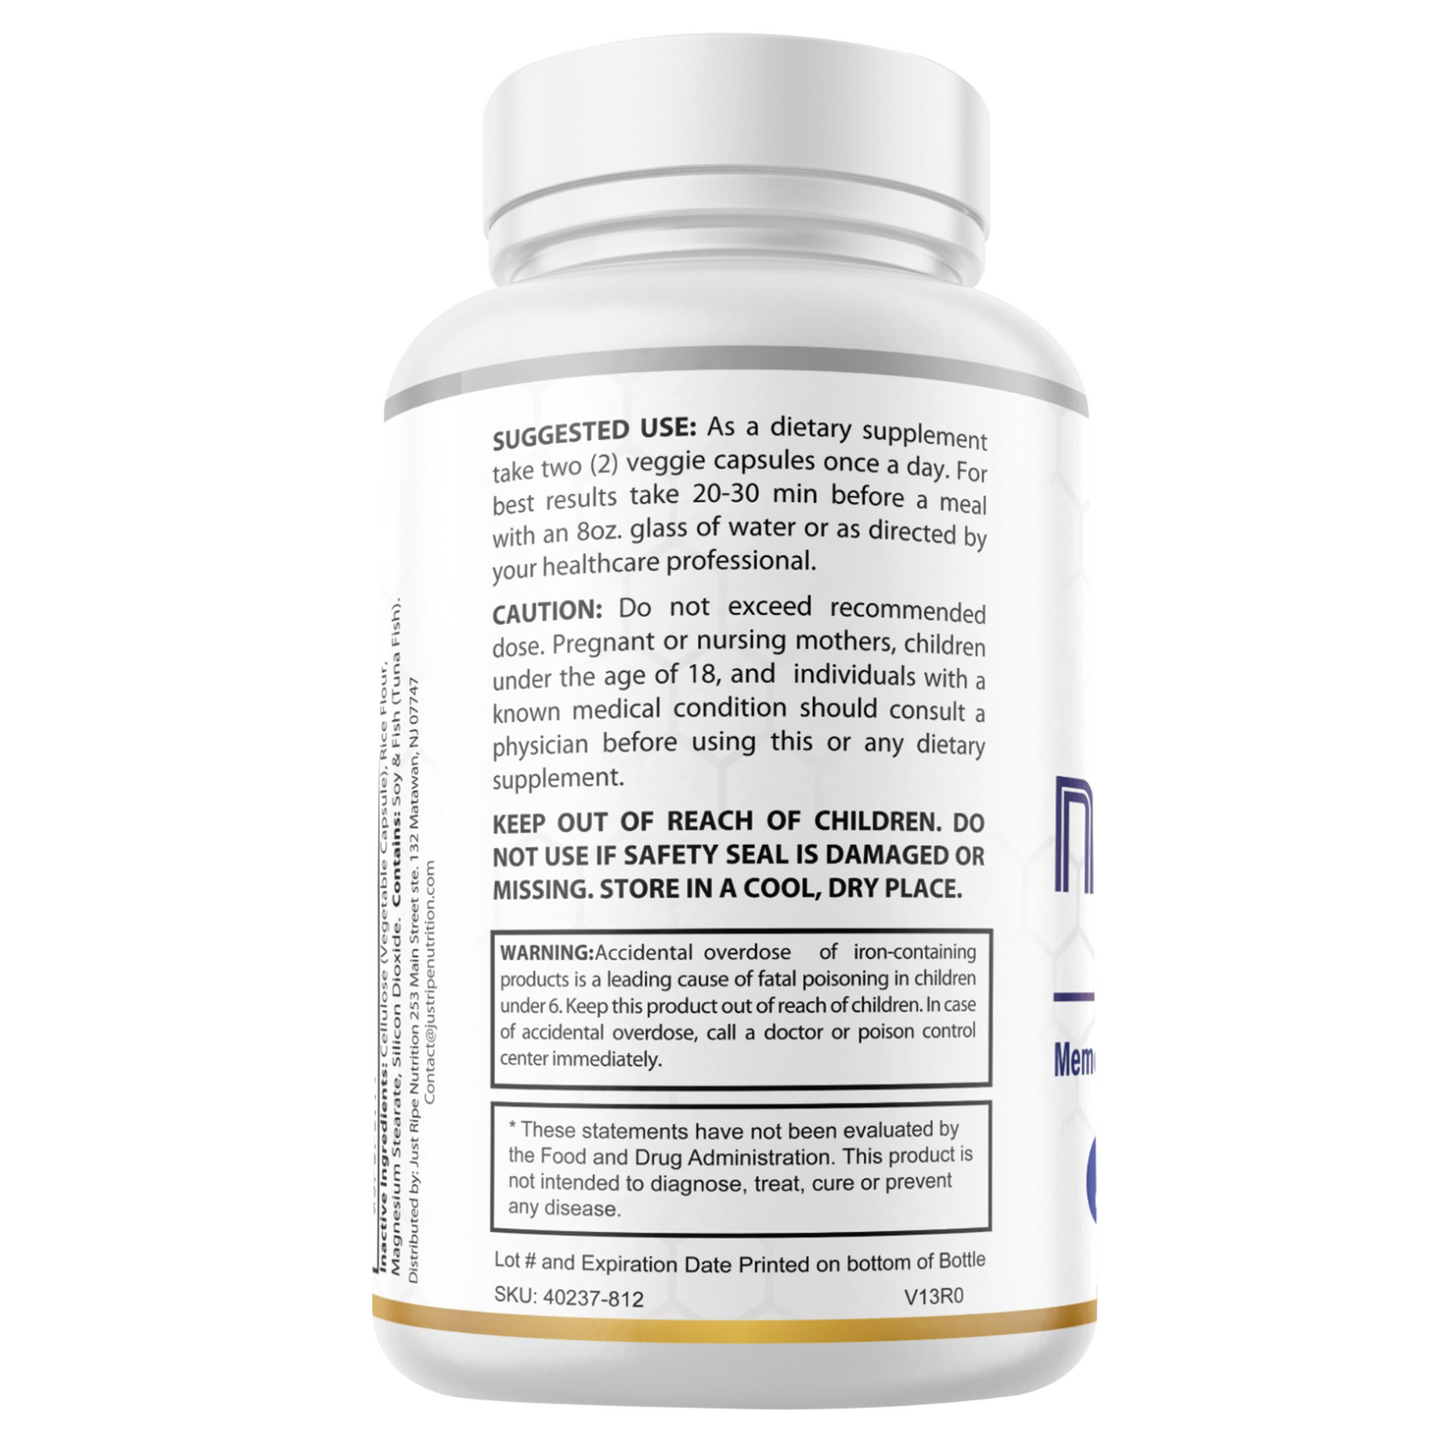 Nooceptin - Cognitive Enhancer Capsules for Cognition and Focus, 10 Pack